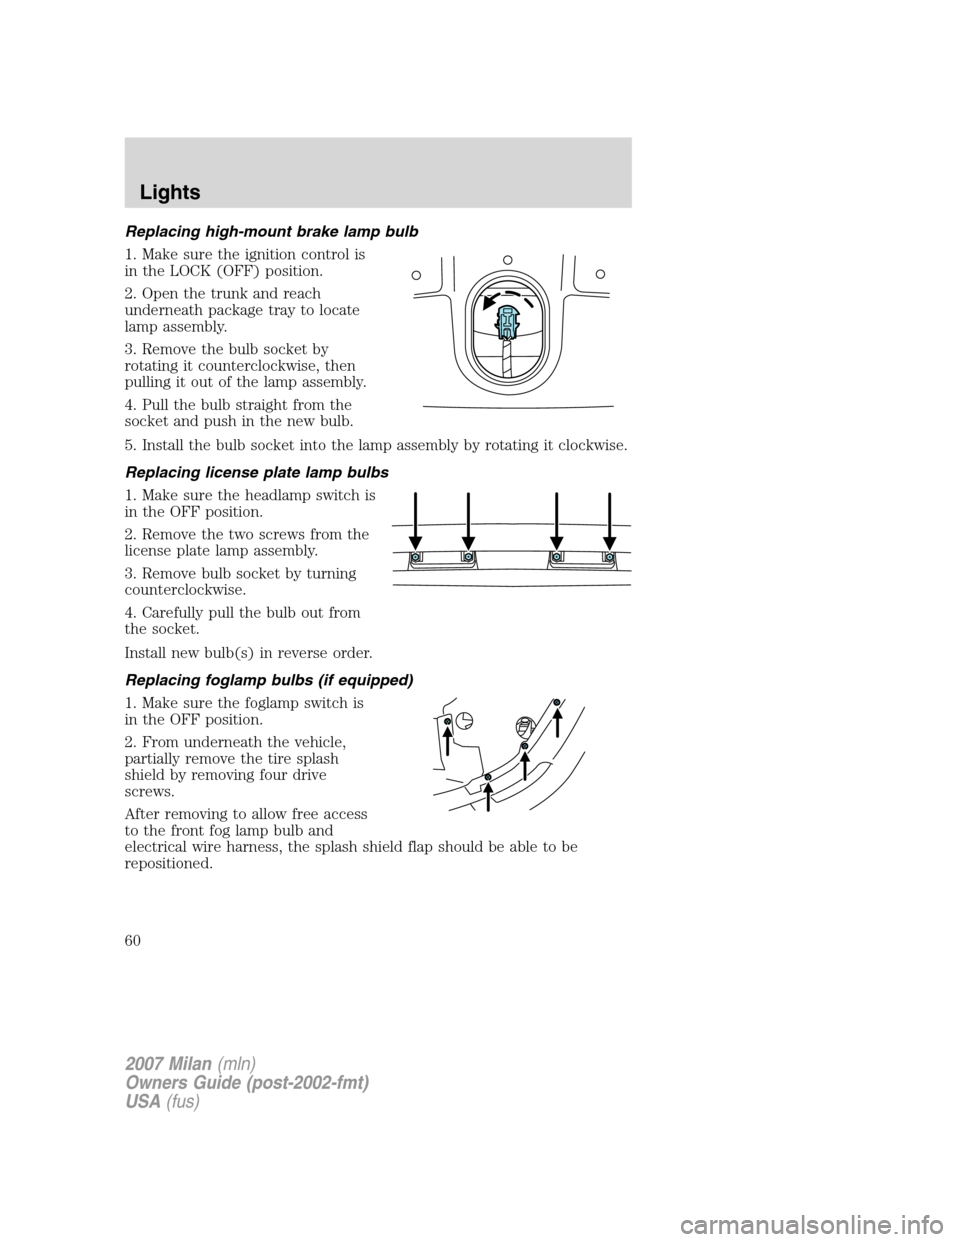 Mercury Milan 2007  Owners Manuals Replacing high-mount brake lamp bulb
1. Make sure the ignition control is
in the LOCK (OFF) position.
2. Open the trunk and reach
underneath package tray to locate
lamp assembly.
3. Remove the bulb so